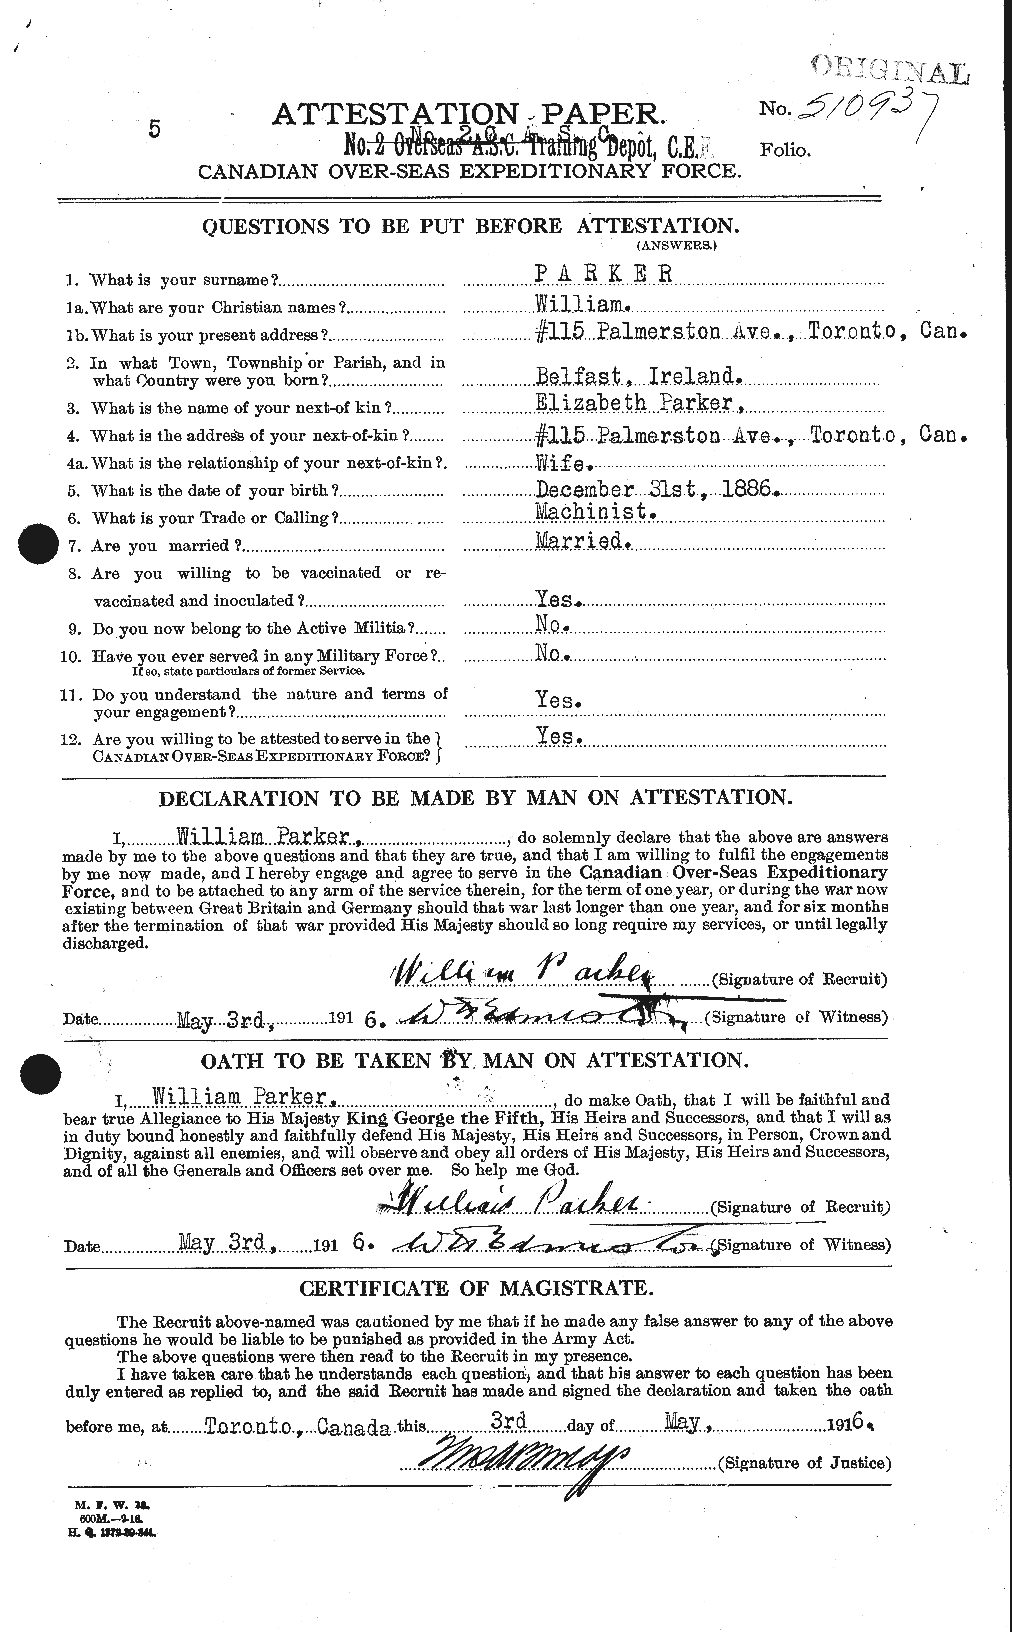 Personnel Records of the First World War - CEF 565728a